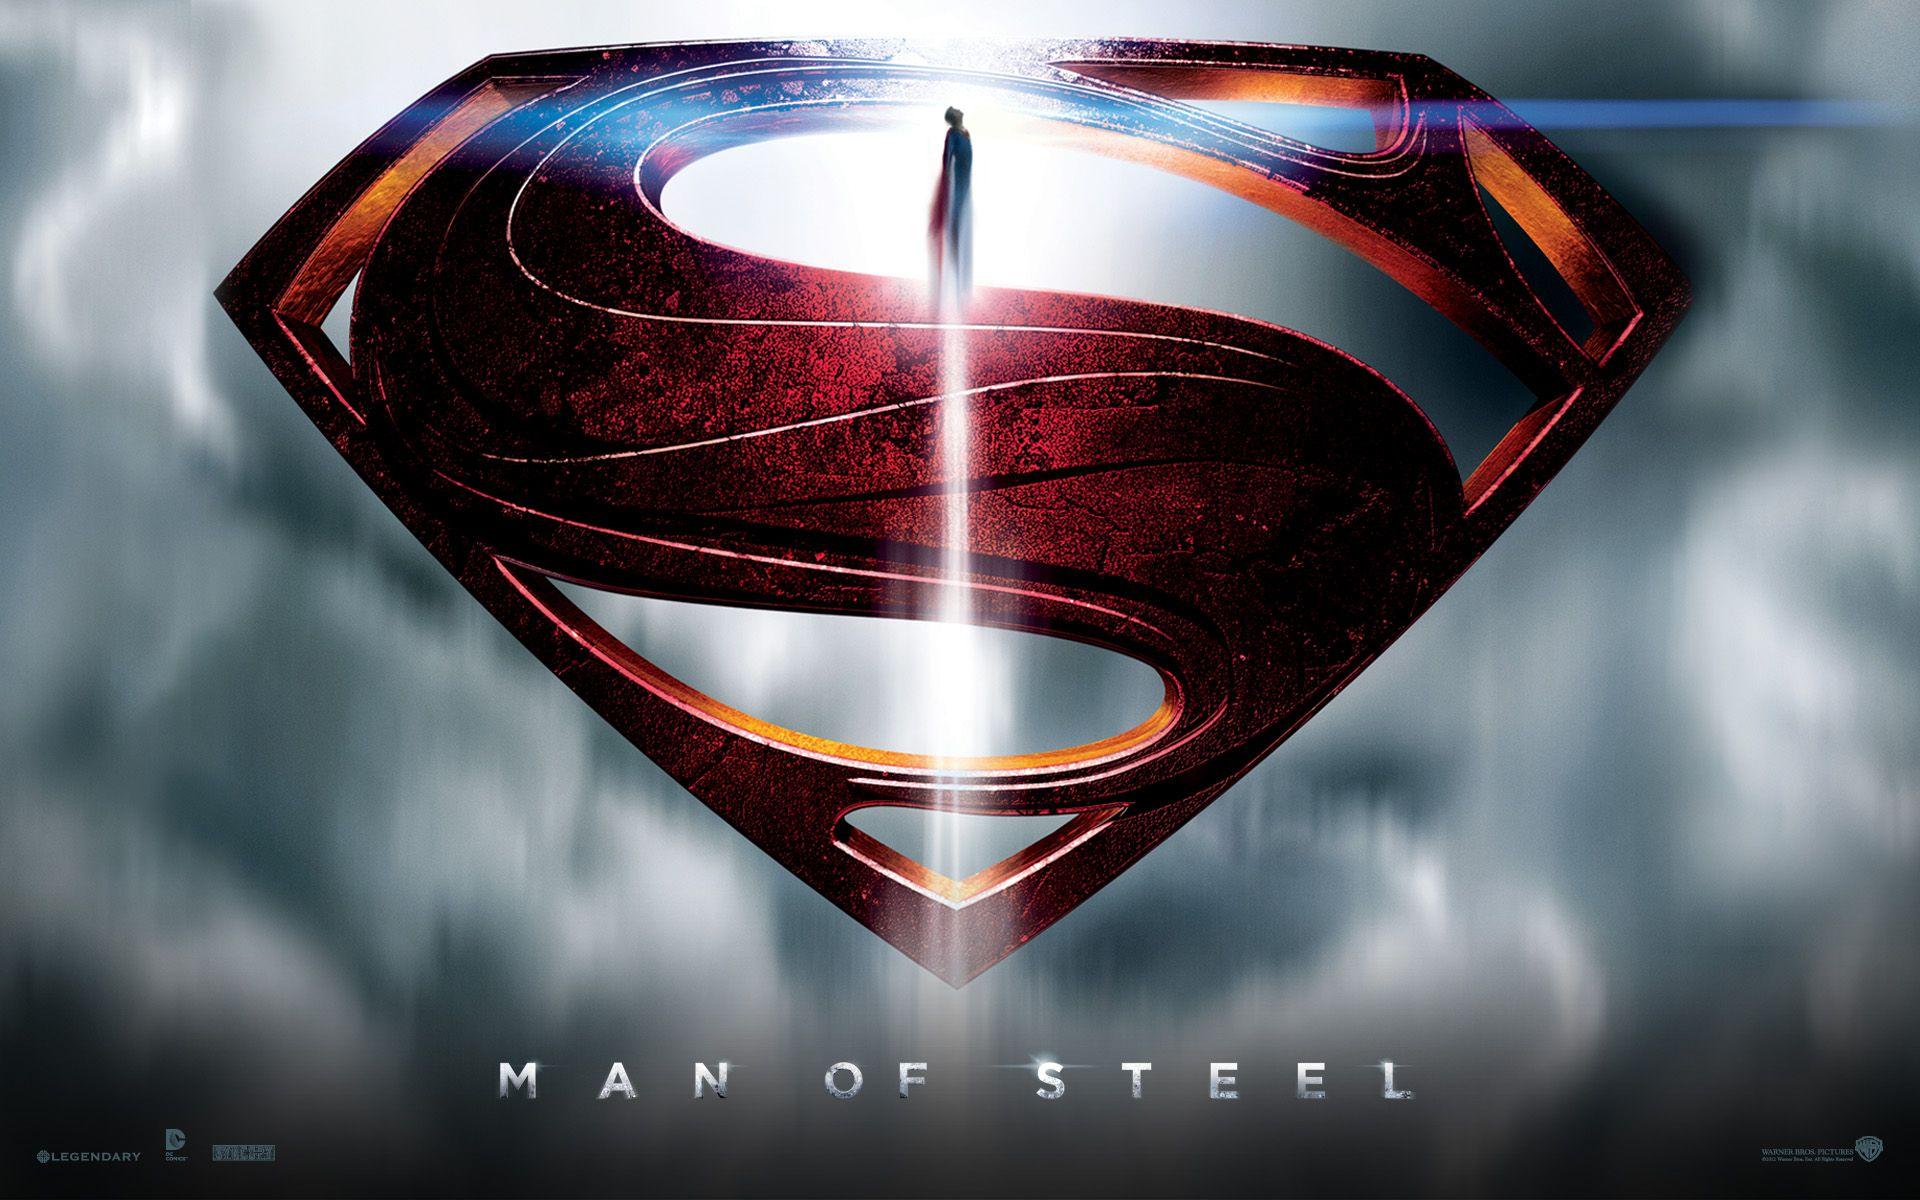 Man Of Steel. Free Desktop Wallpaper for Widescreen, HD and Mobile